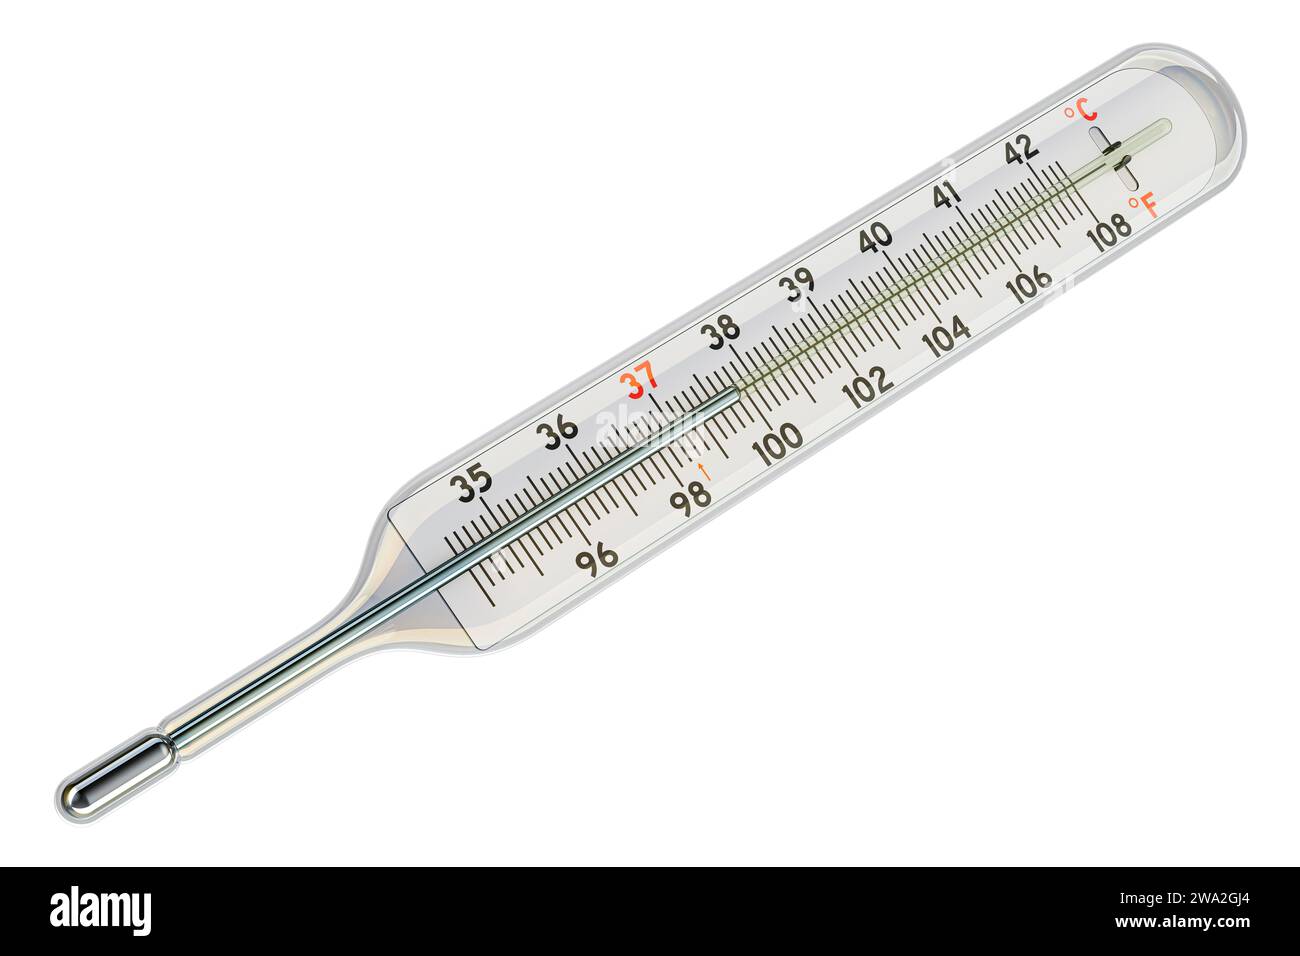 Medical, clinical mercury thermometer showing the temperature in Fahrenheit and Celsius scales, 3D rendering isolated on white background Stock Photo